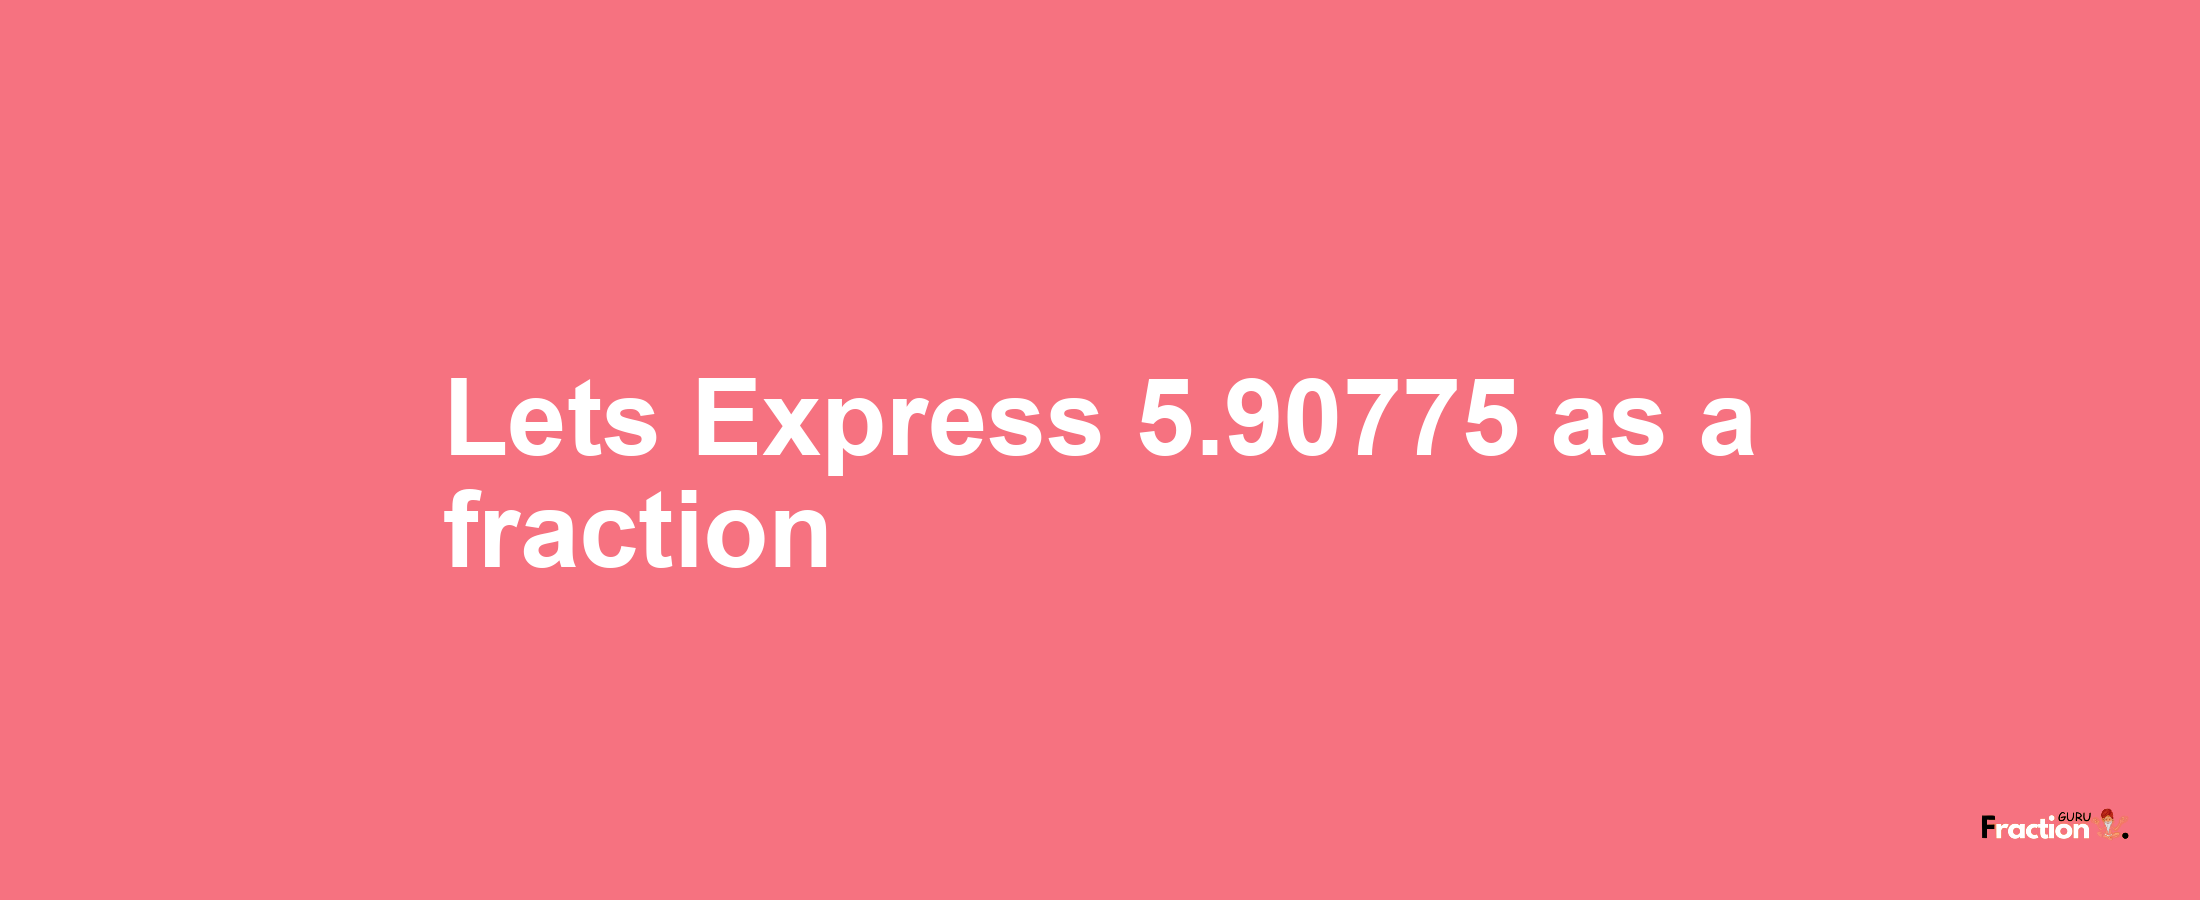 Lets Express 5.90775 as afraction